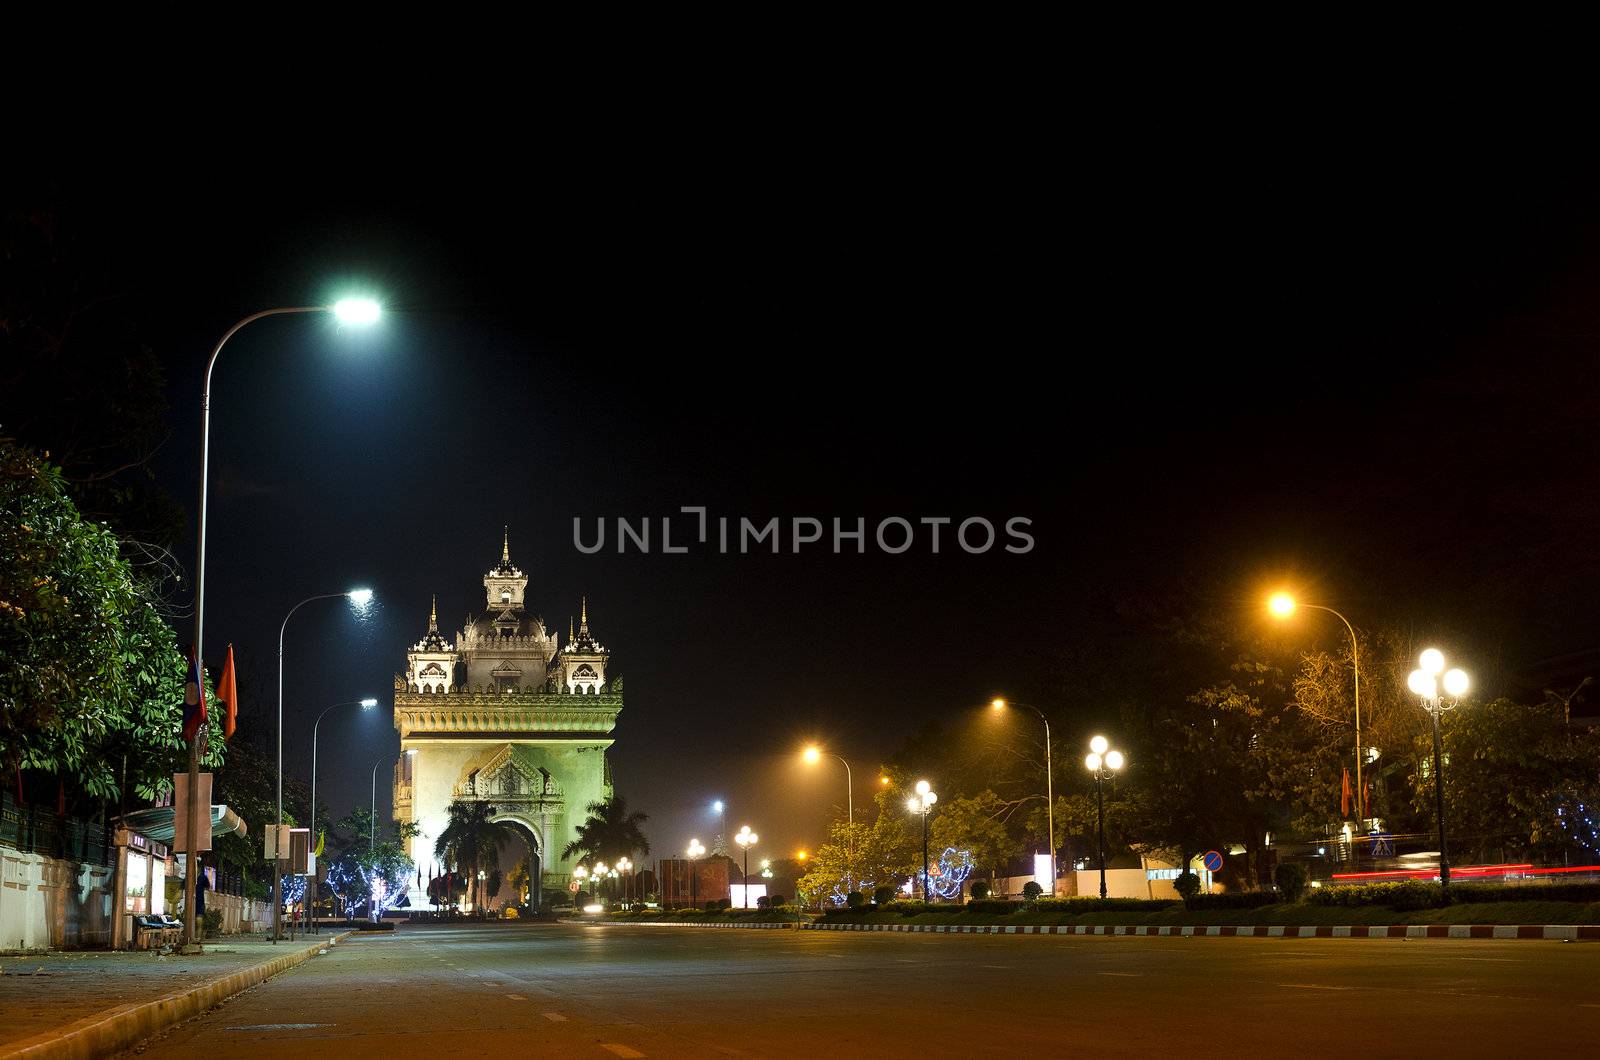 patuxai arch at night in vientiane, laos by jackmalipan